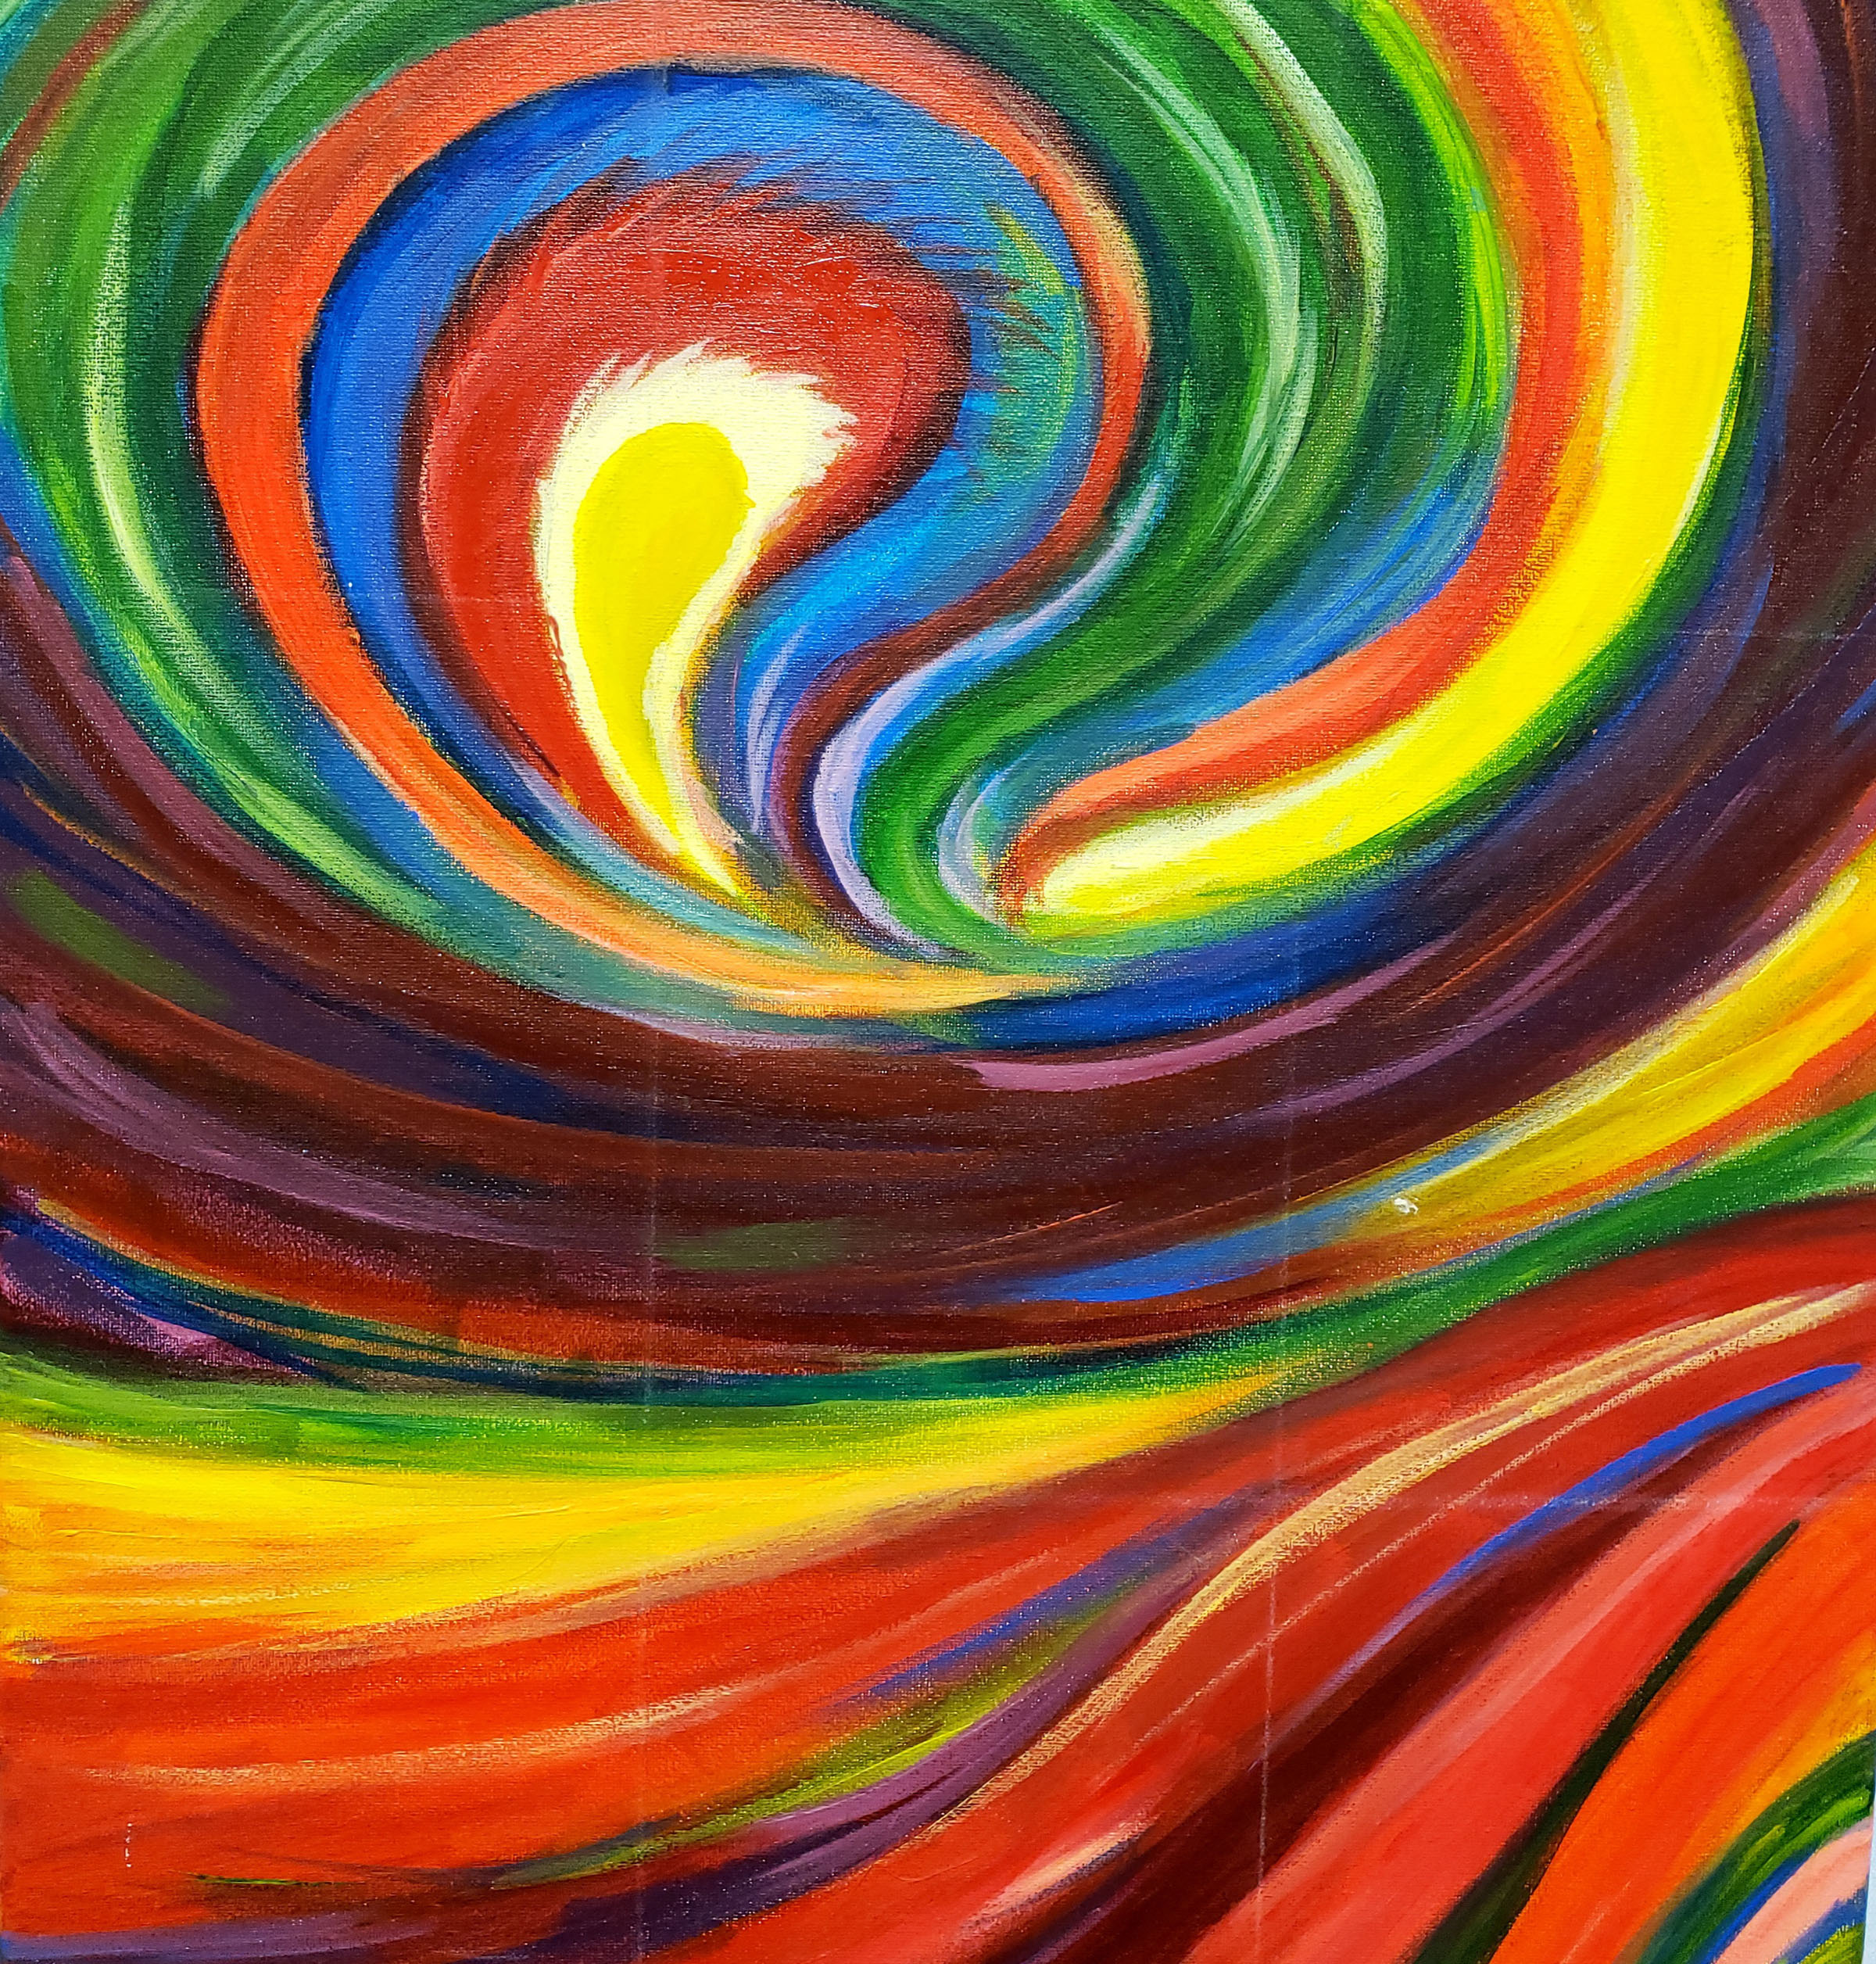 Abstract painting of a swirl of colors